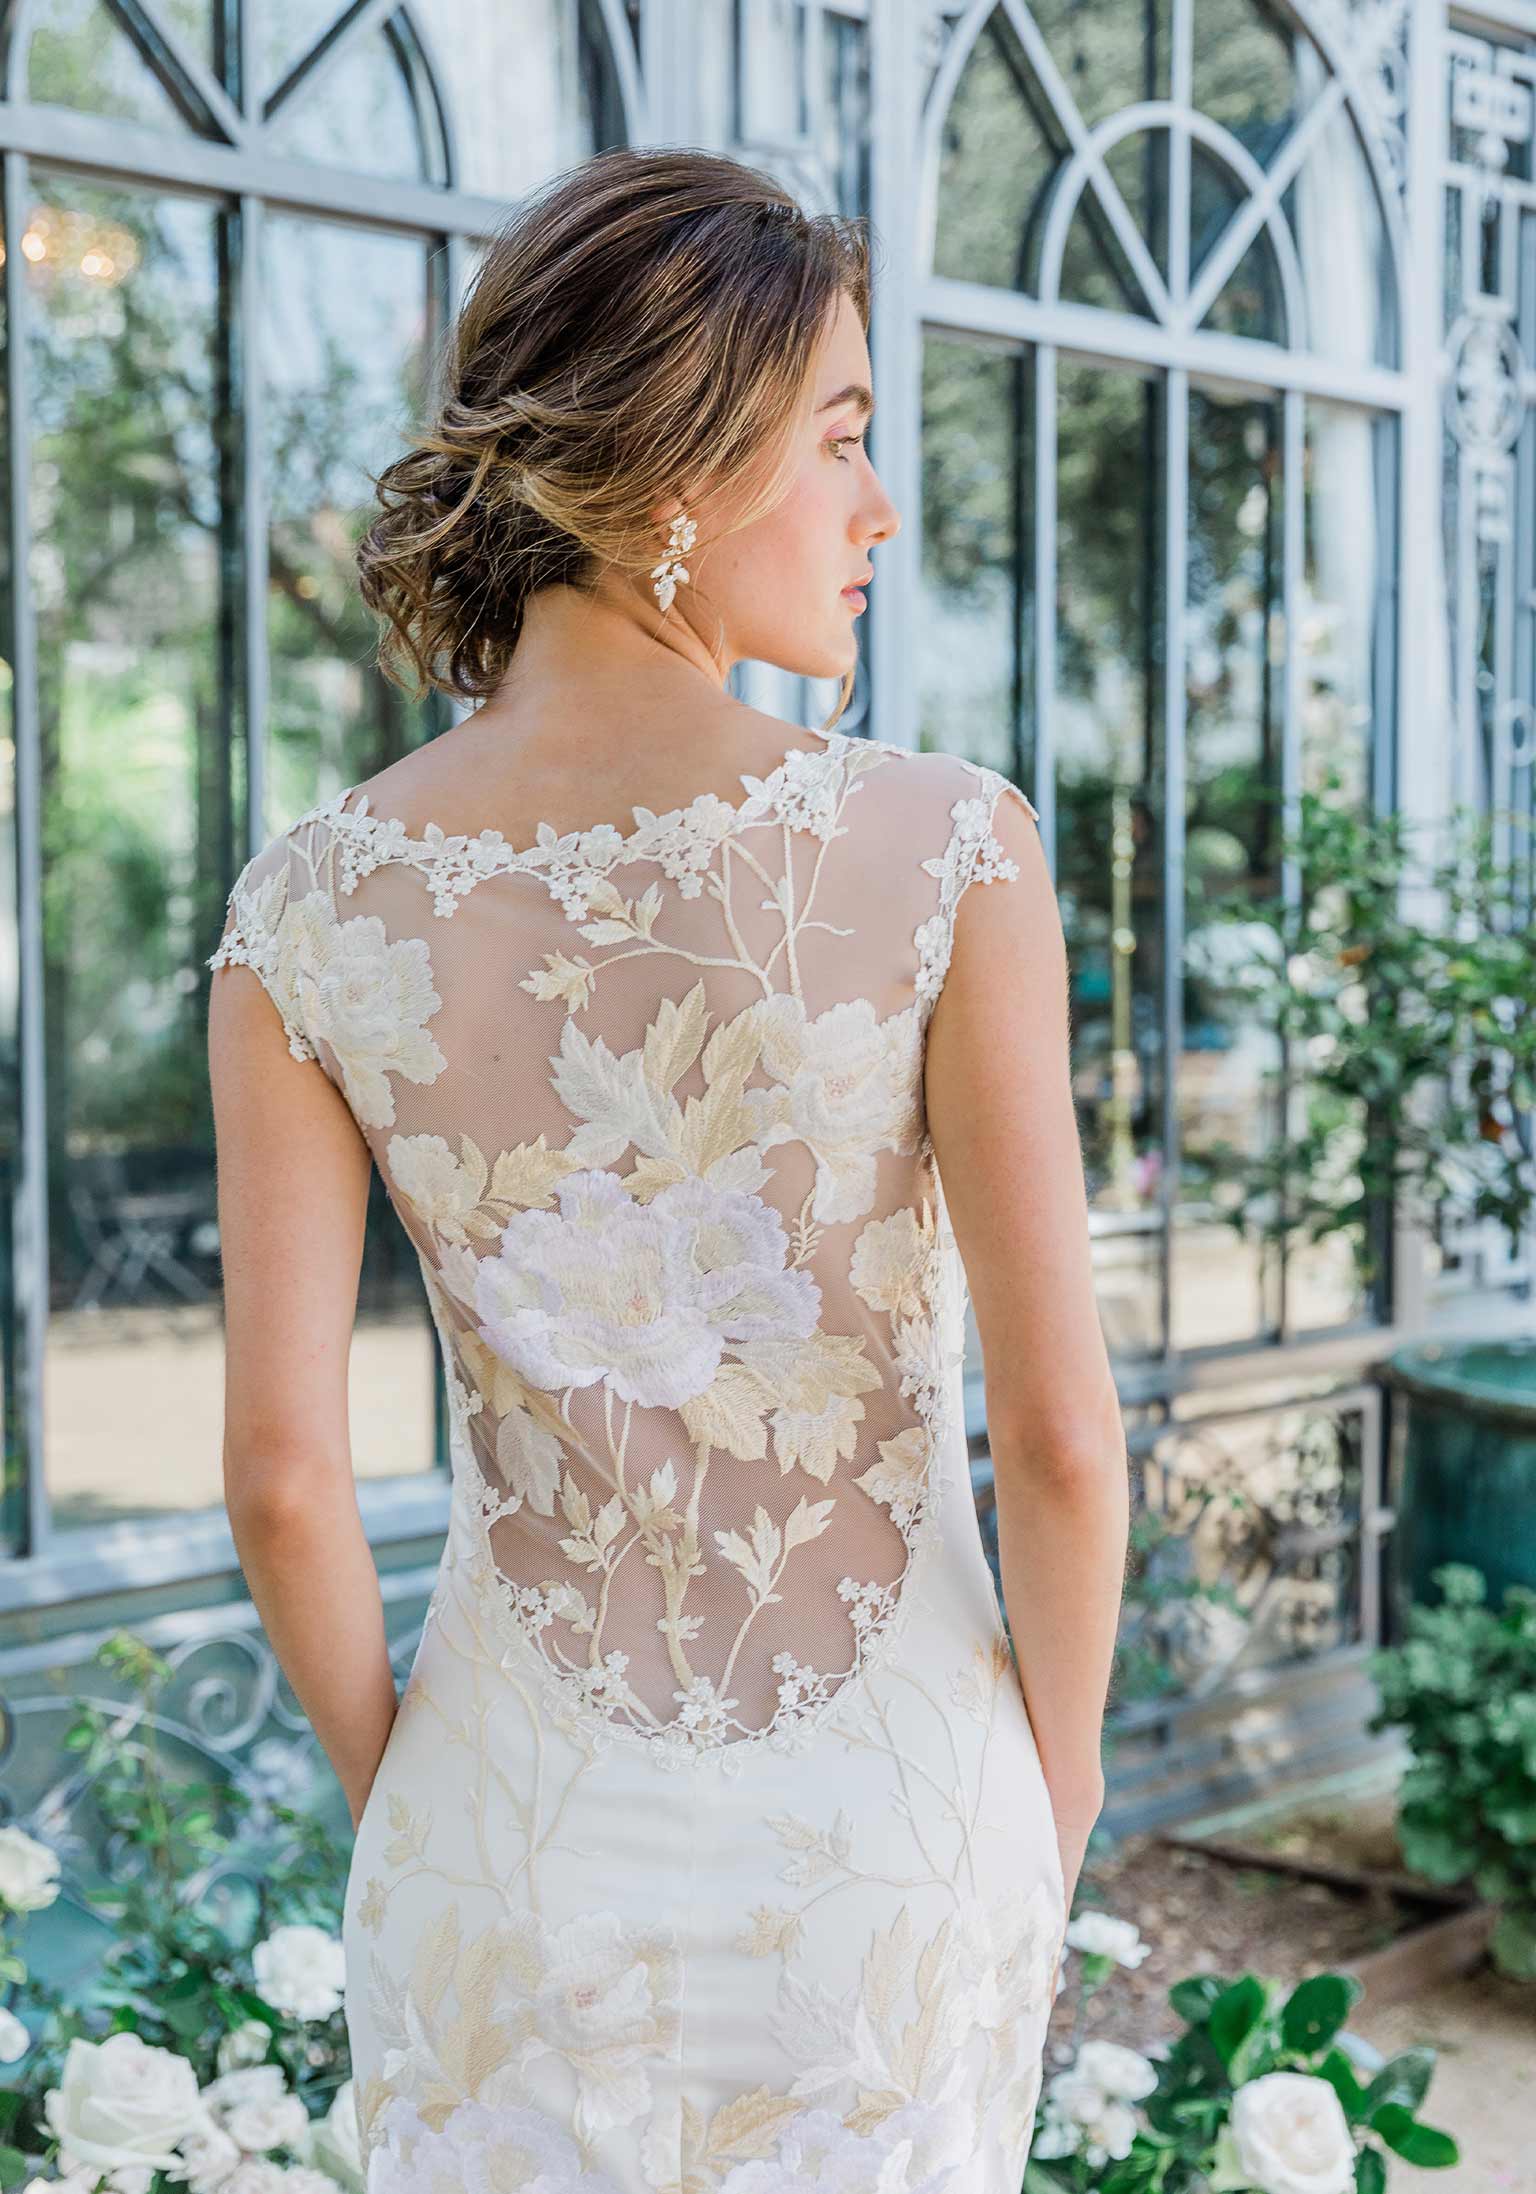 Illusion Back with floral embroidered motif on Hana Wedding Dress